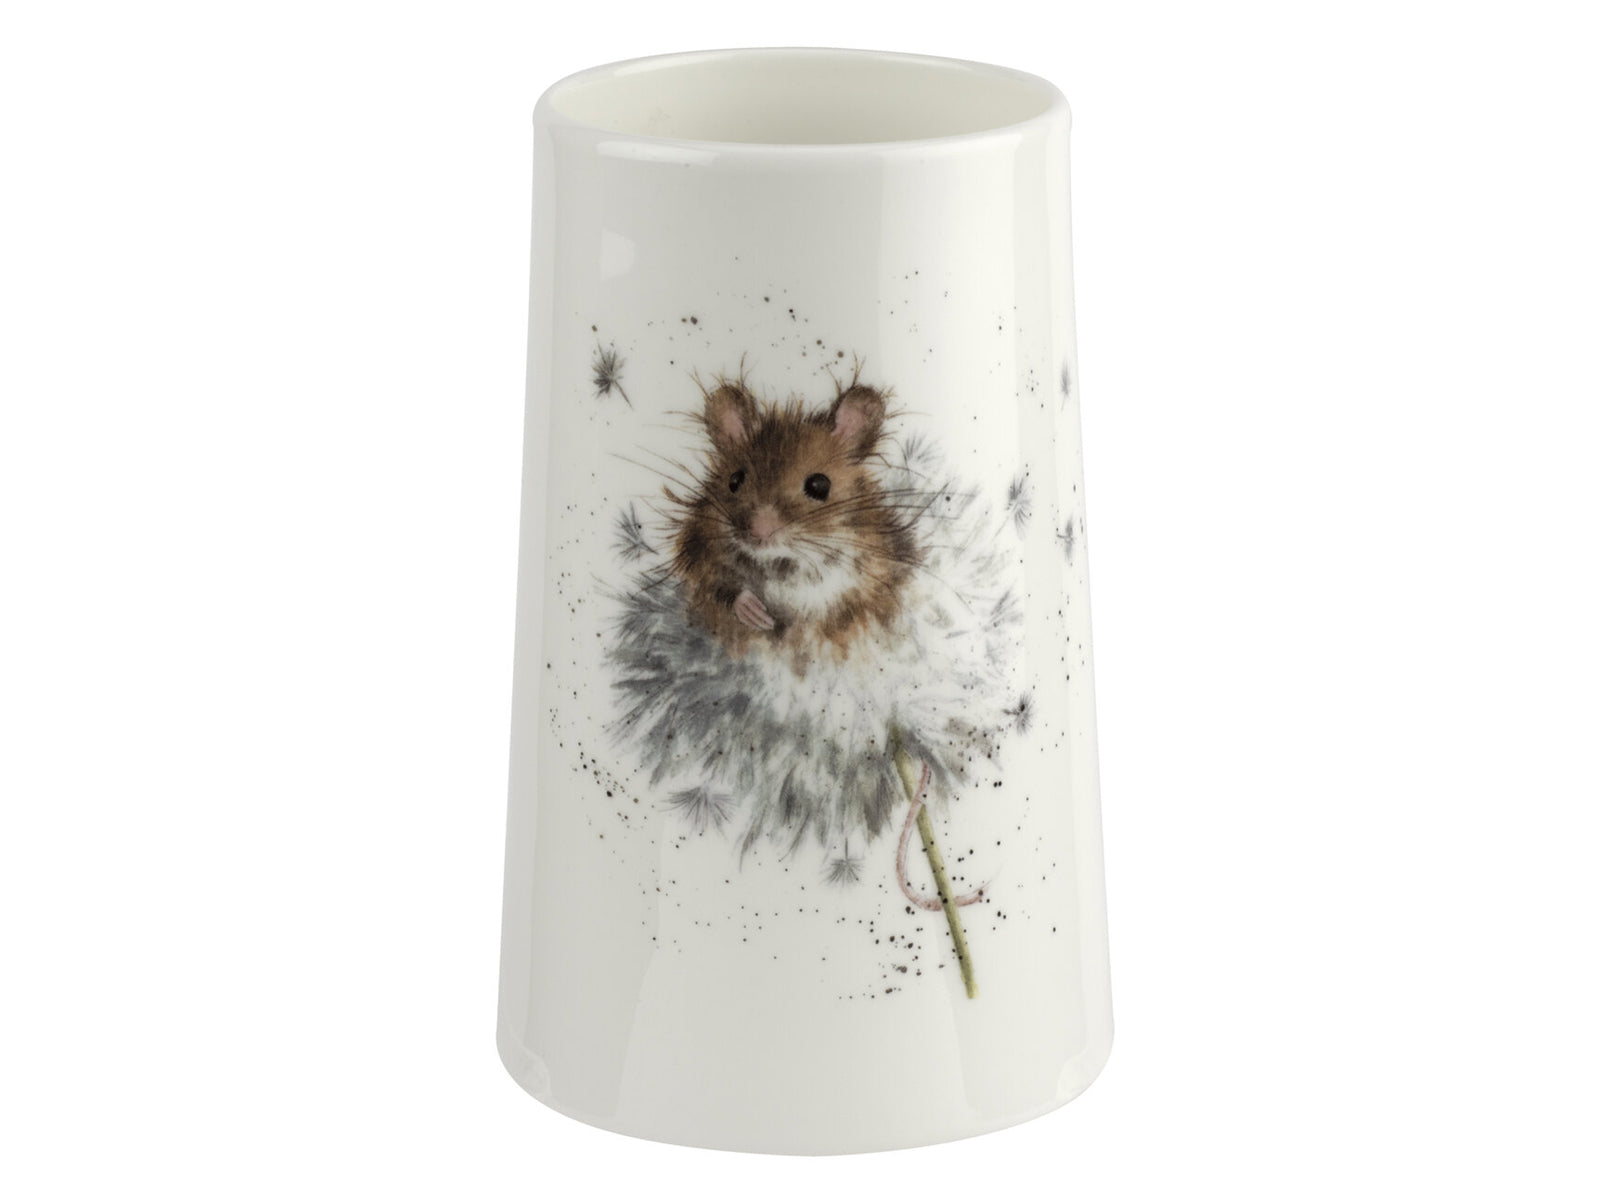 A white porcelain vase with a mouse sitting in a dandelion clock on the front